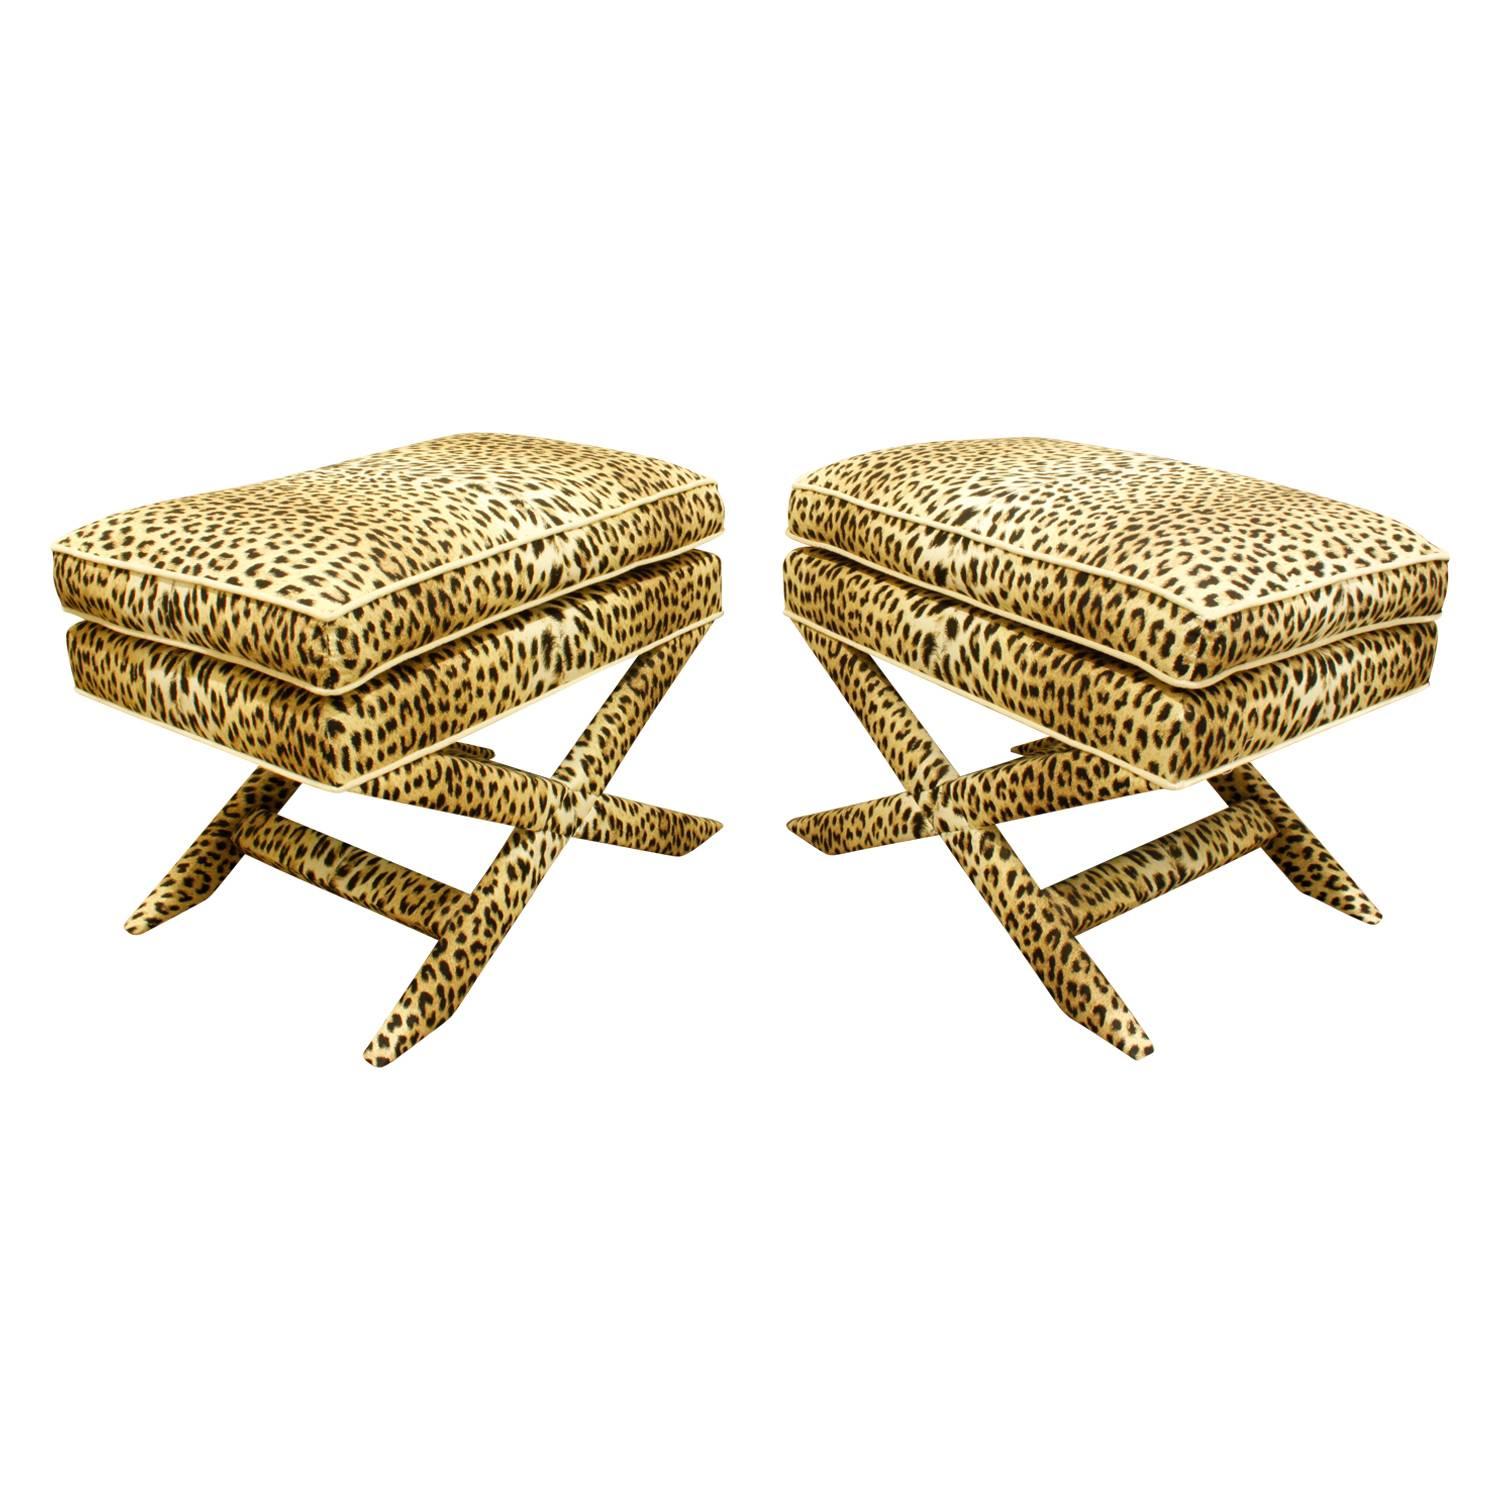 Pair of X-benches newly upholstered in a leopard print fabric, American, 1970s.